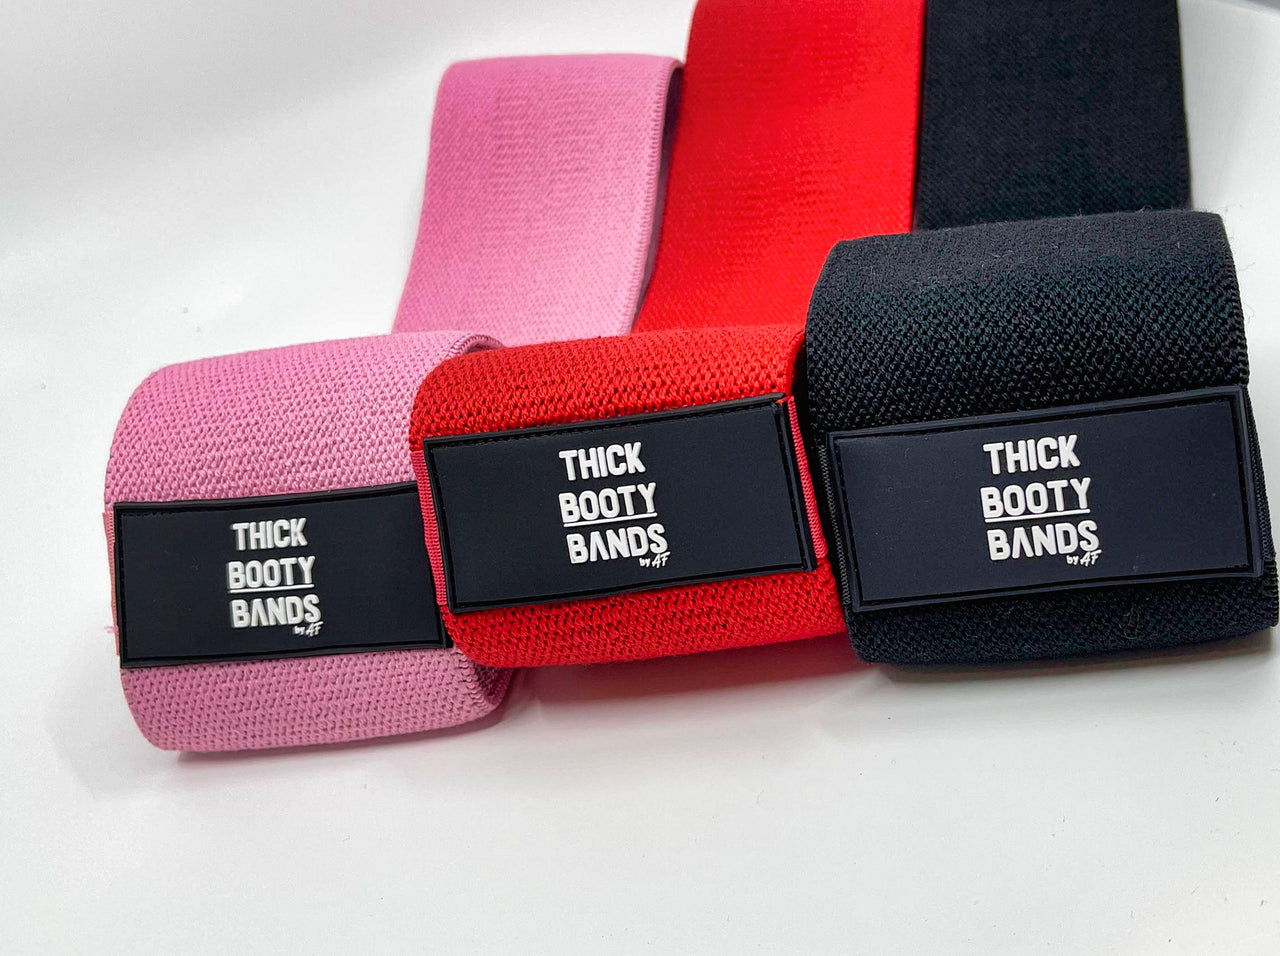 THICK BOOTY BANDS